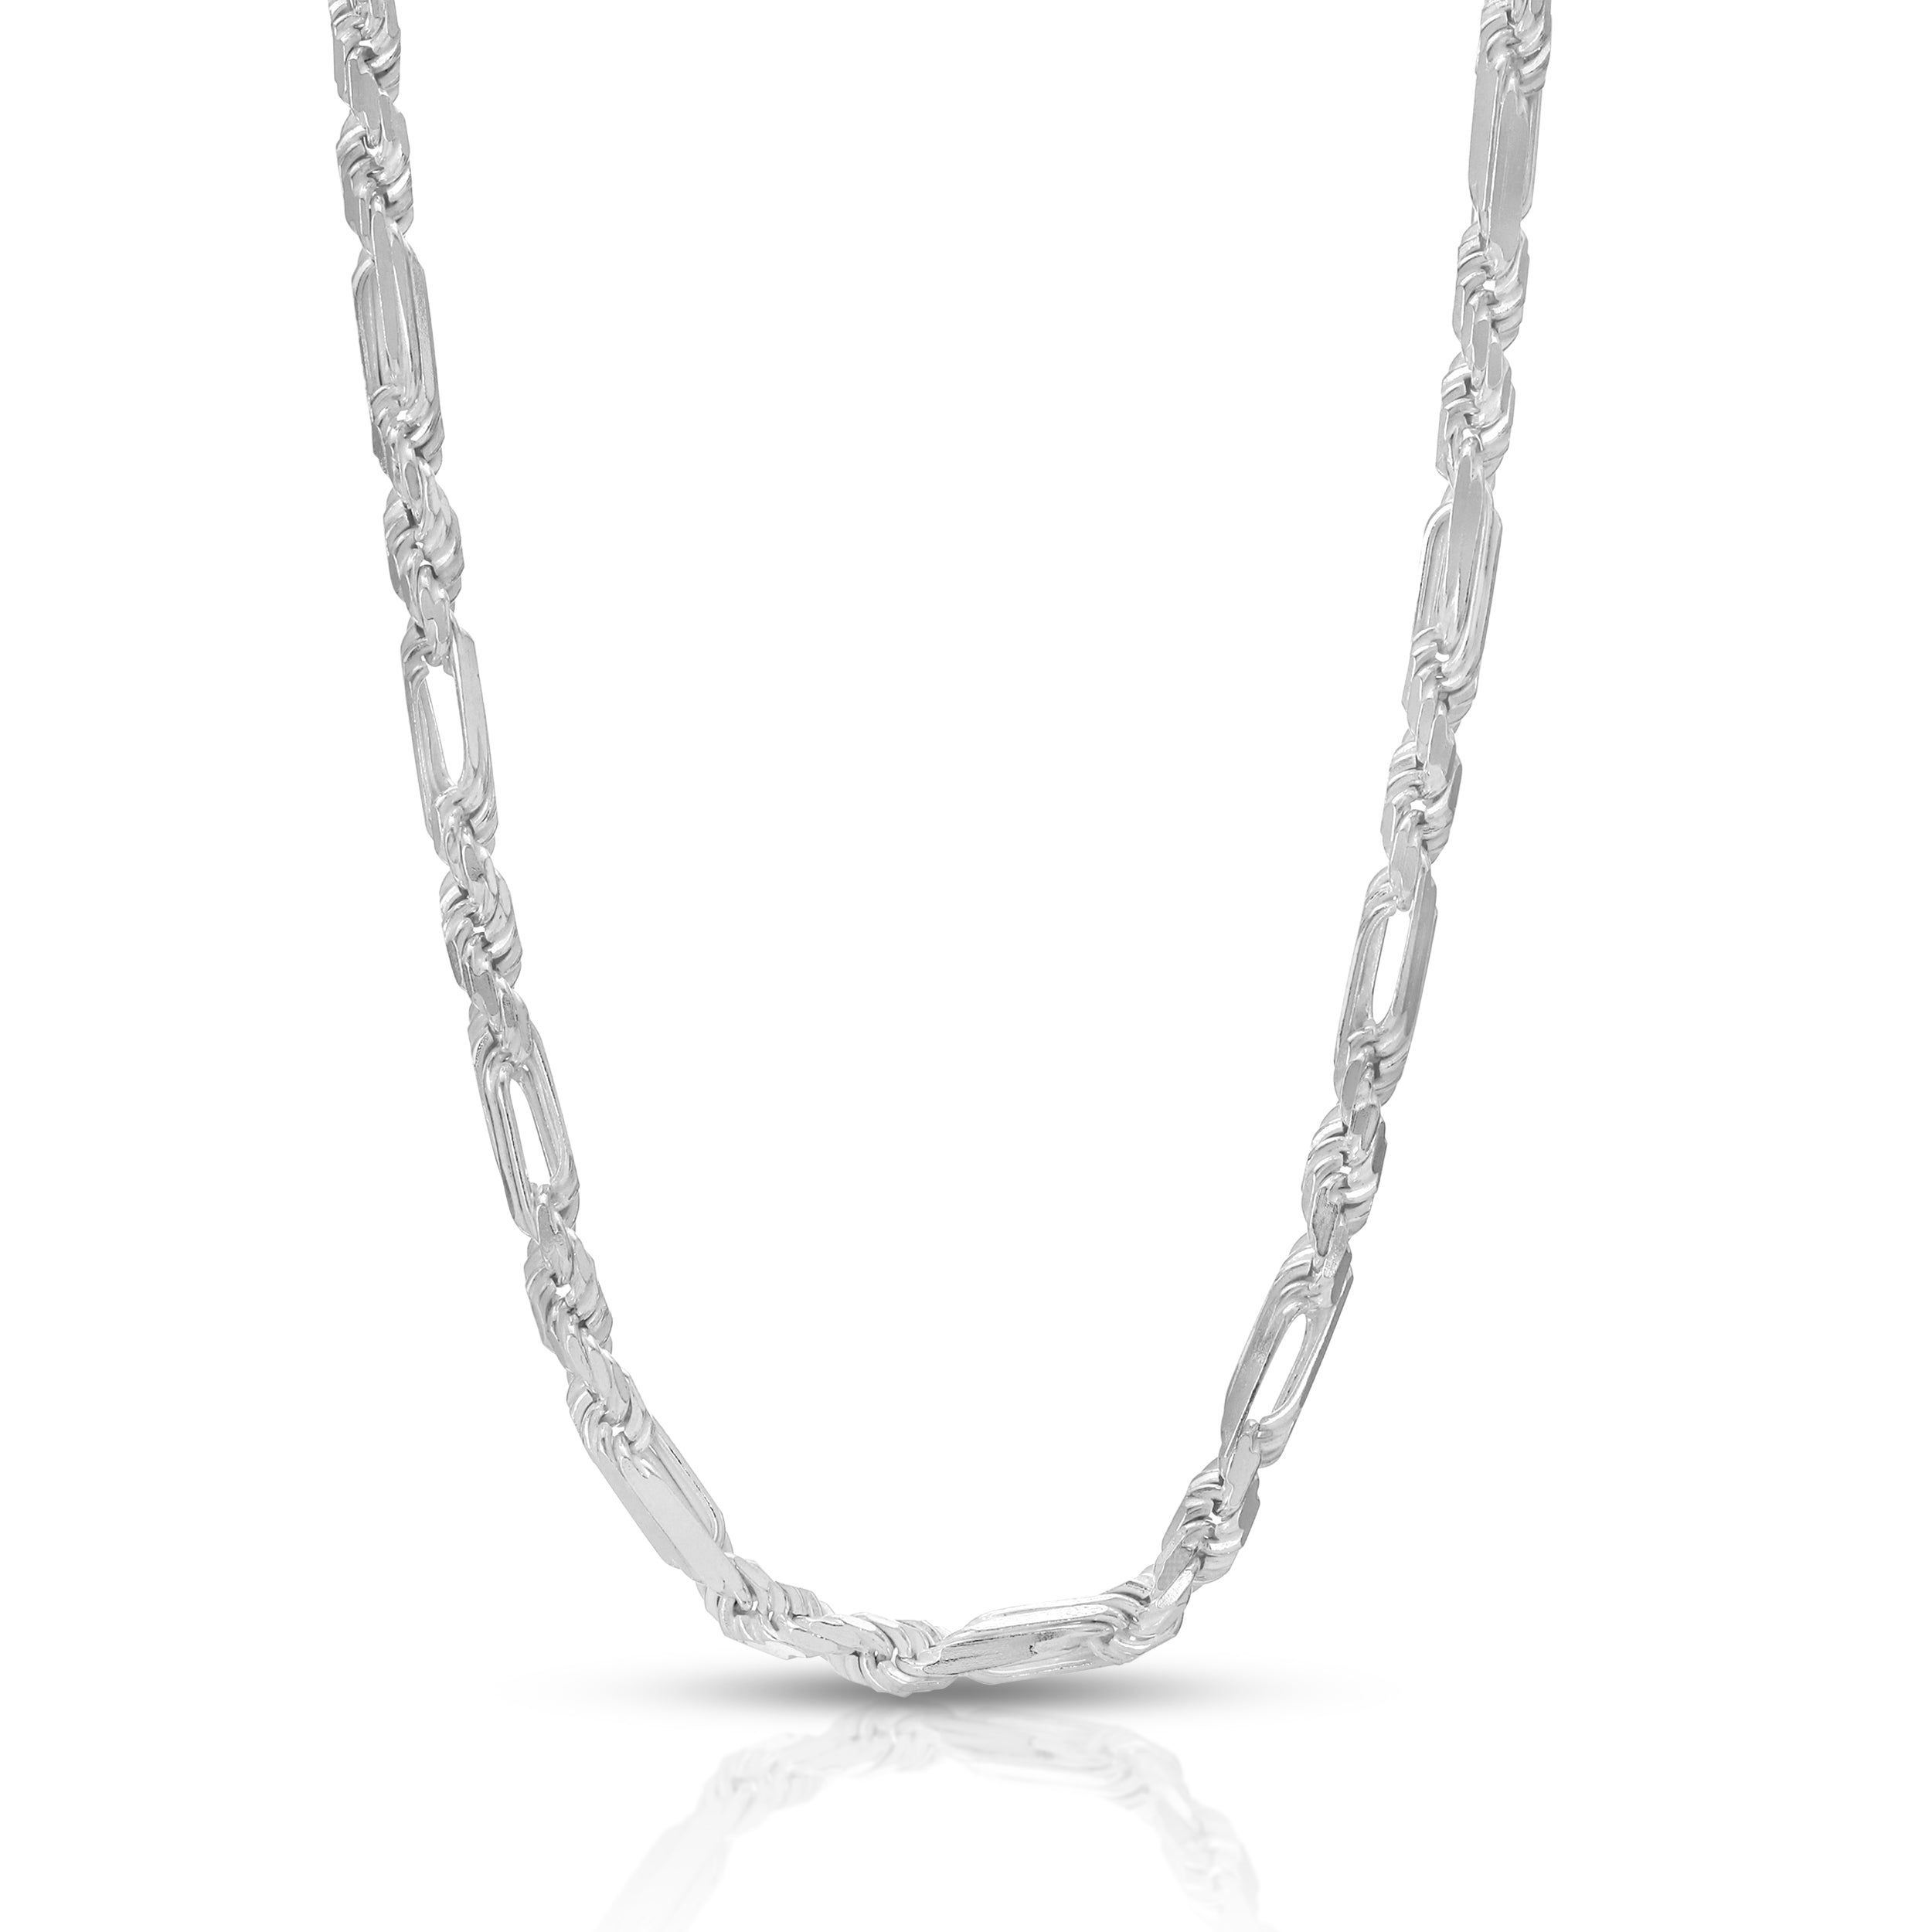 Figarope sterling silver chain